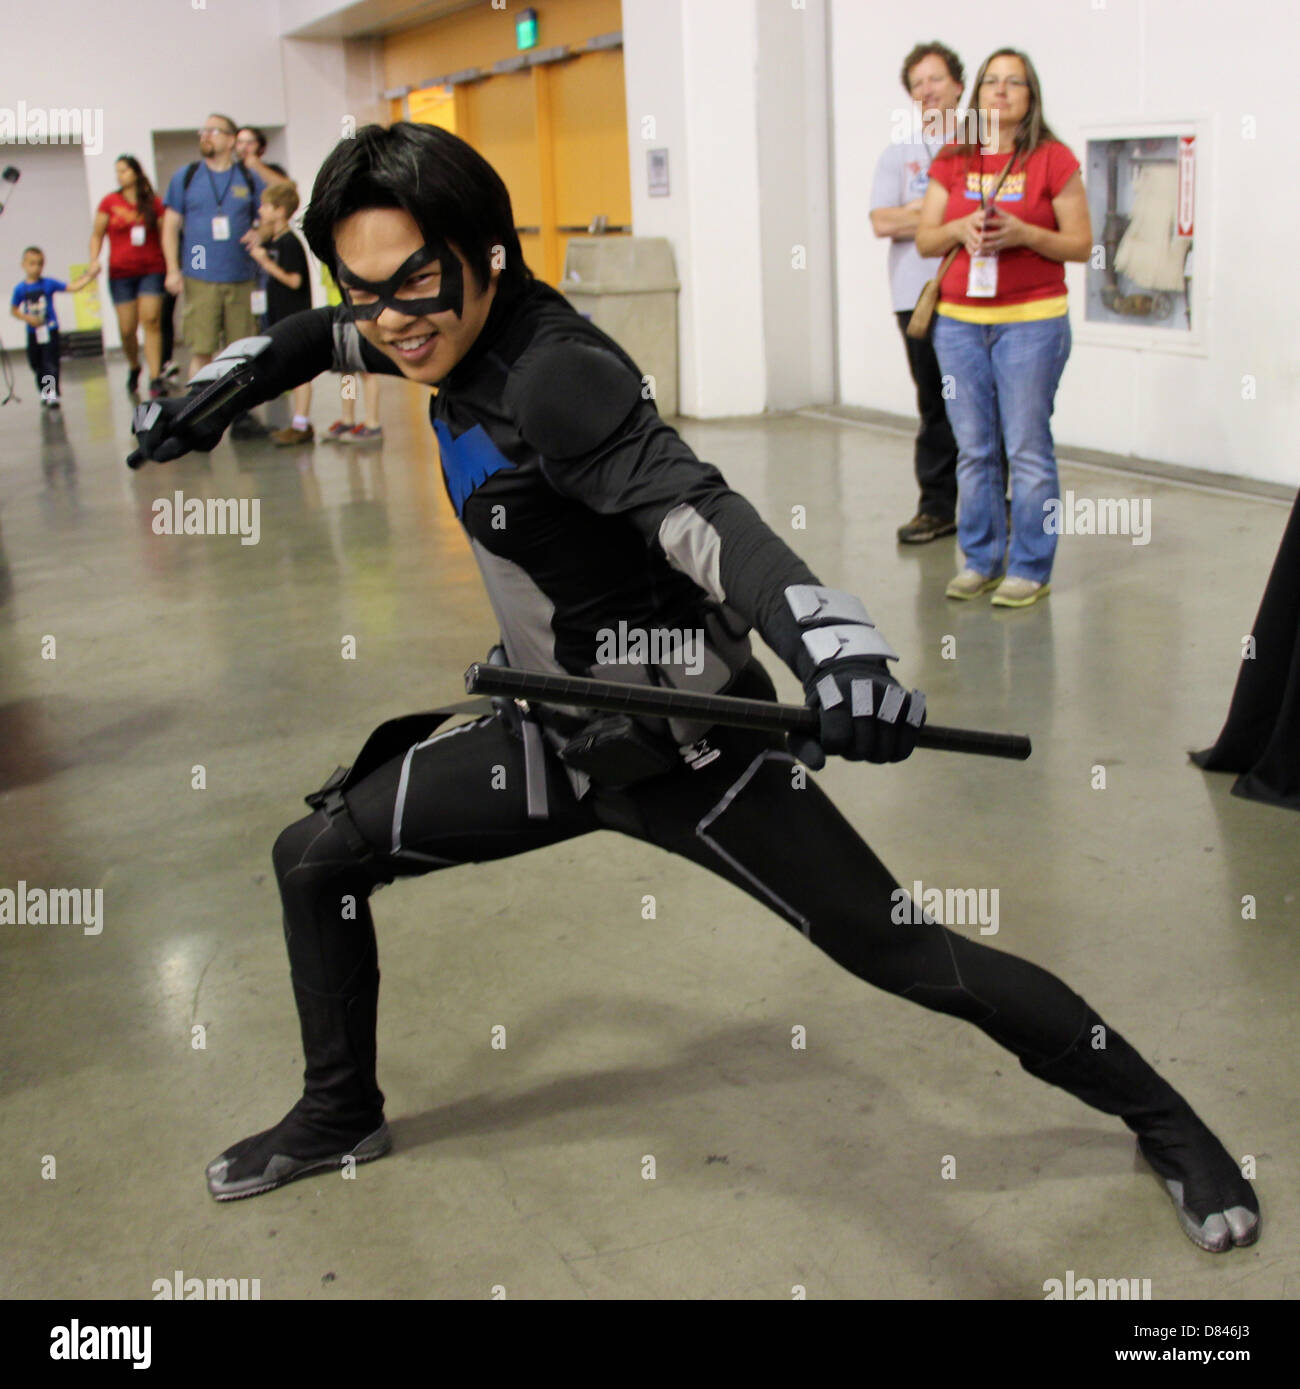 San Jose, USA. 18th May, 2013. The Big Wow ComicFest comic book festival held at the San Jose Convention Center. Cosplayer Effesketch. May 18, 2013 Credit: Lisa Werner/Alamy Live News Stock Photo